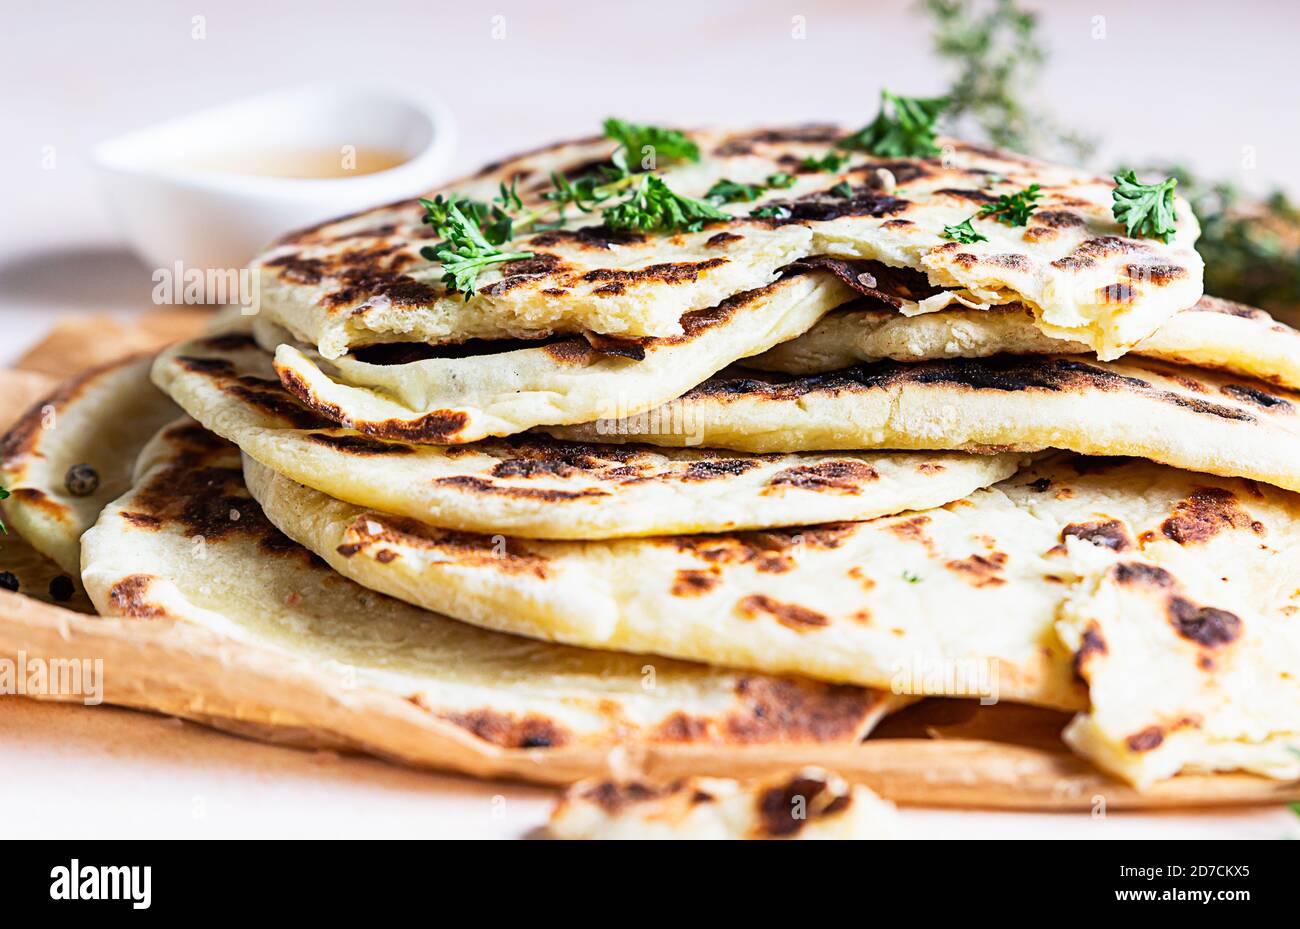 Indian homemade traditional flatbread with fresh parsley and olive oil. Chapati, roti or naan Indian crispy flatbread. Stock Photo